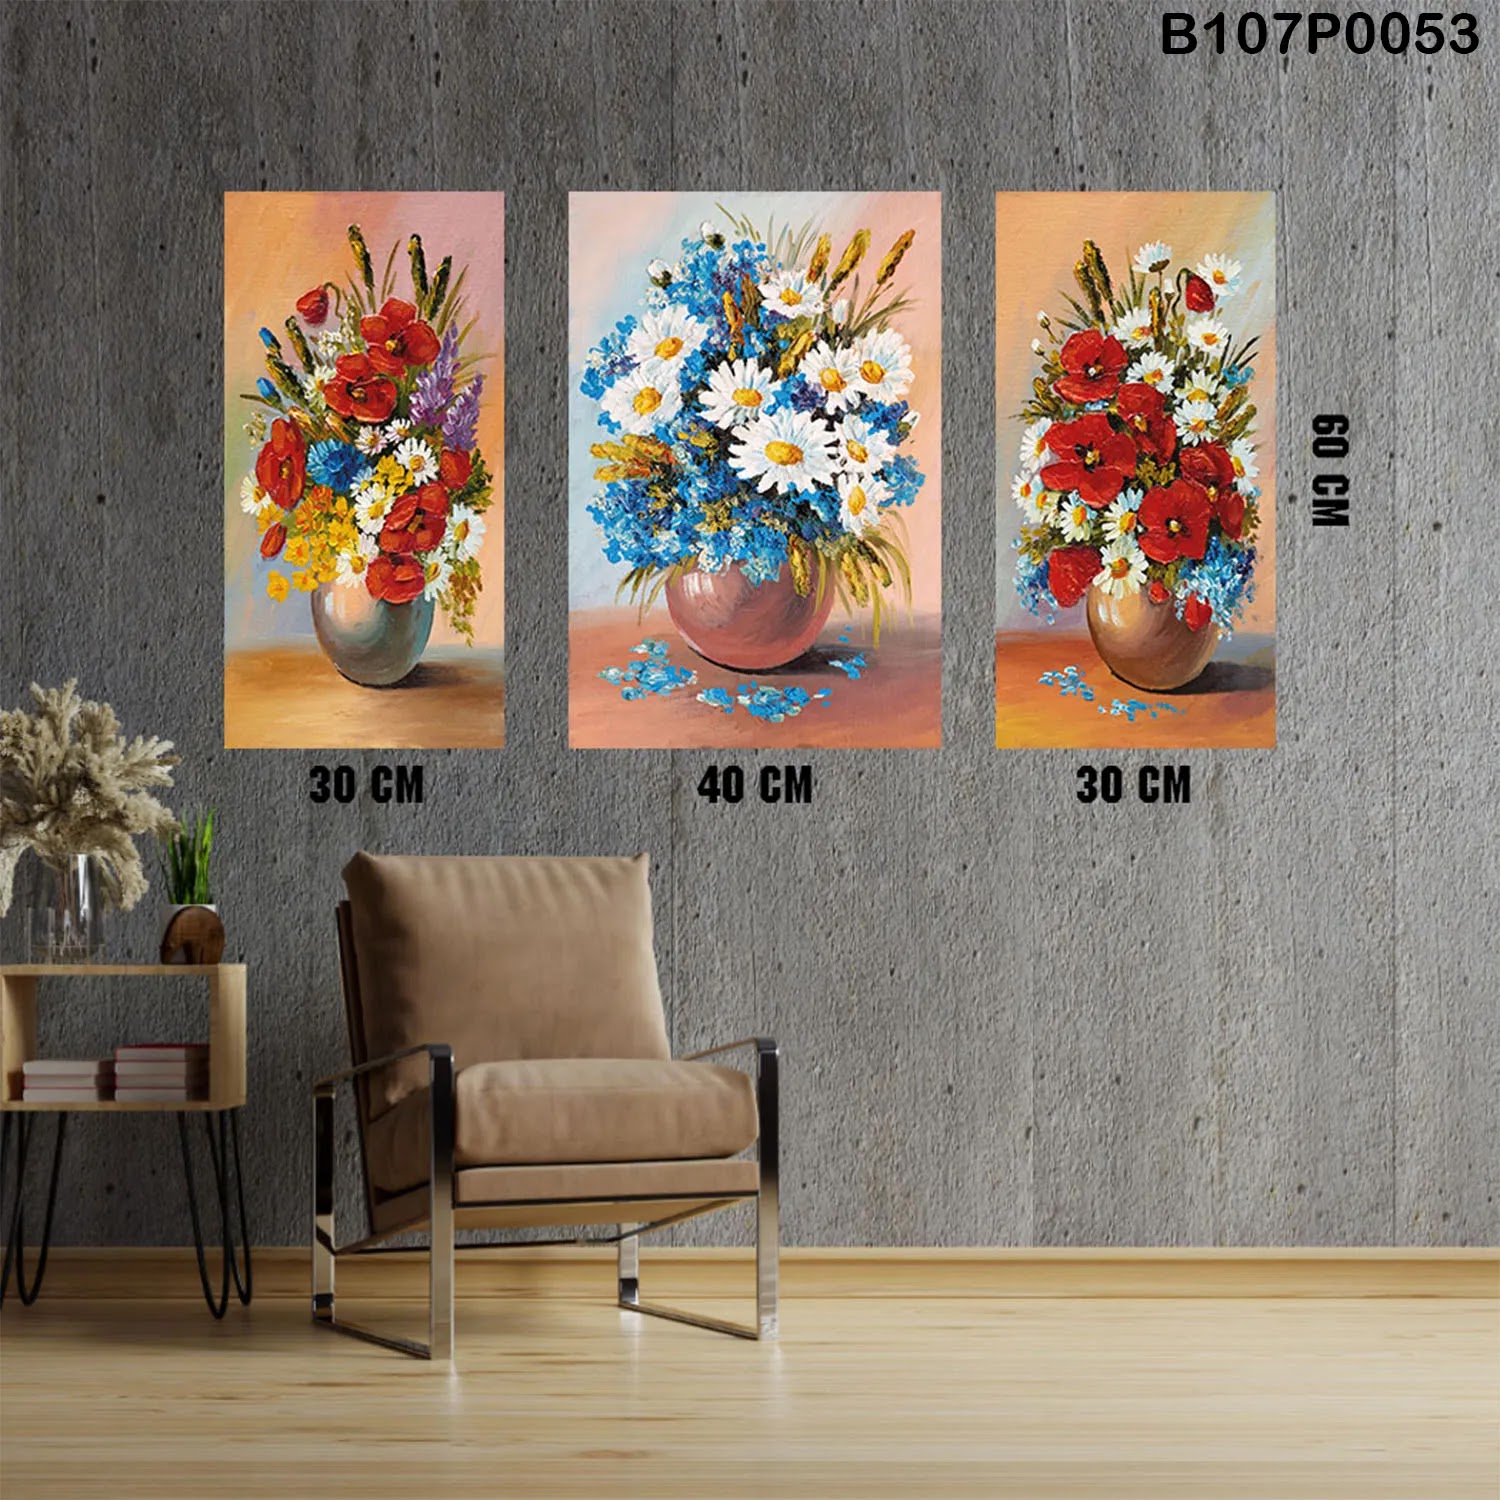 Triptych panel with a vase and flowers